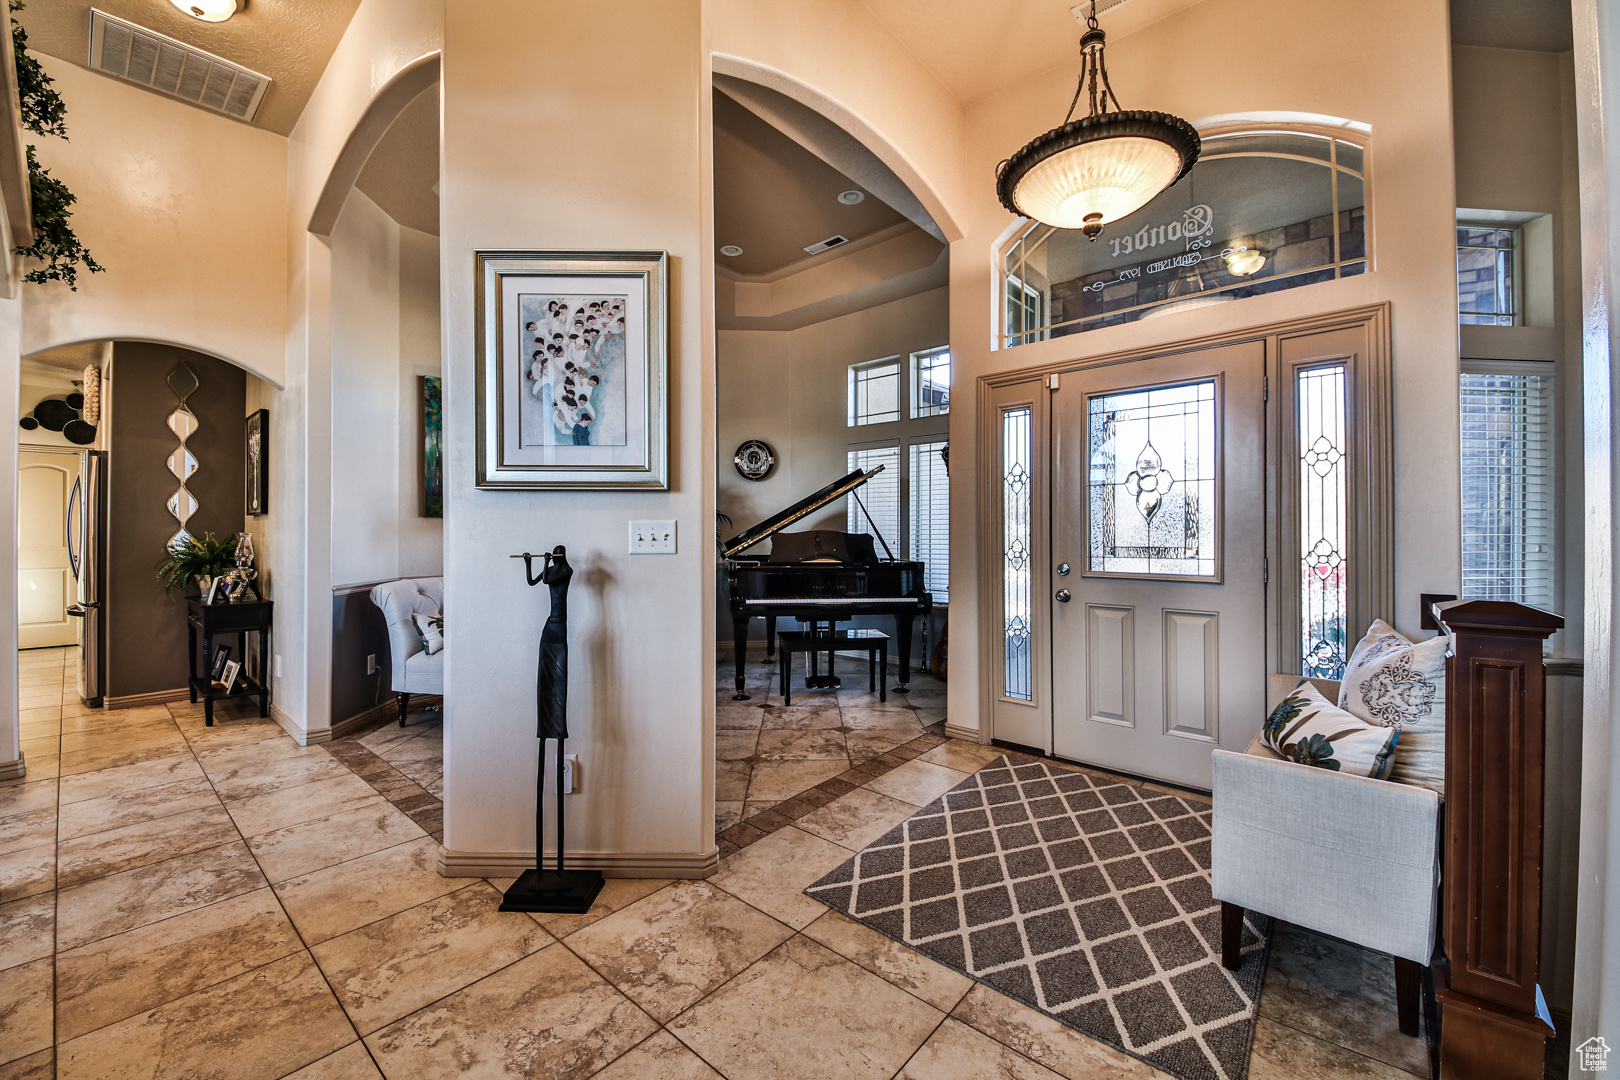 Tiled entryway featuring a towering ceiling and a tray ceiling